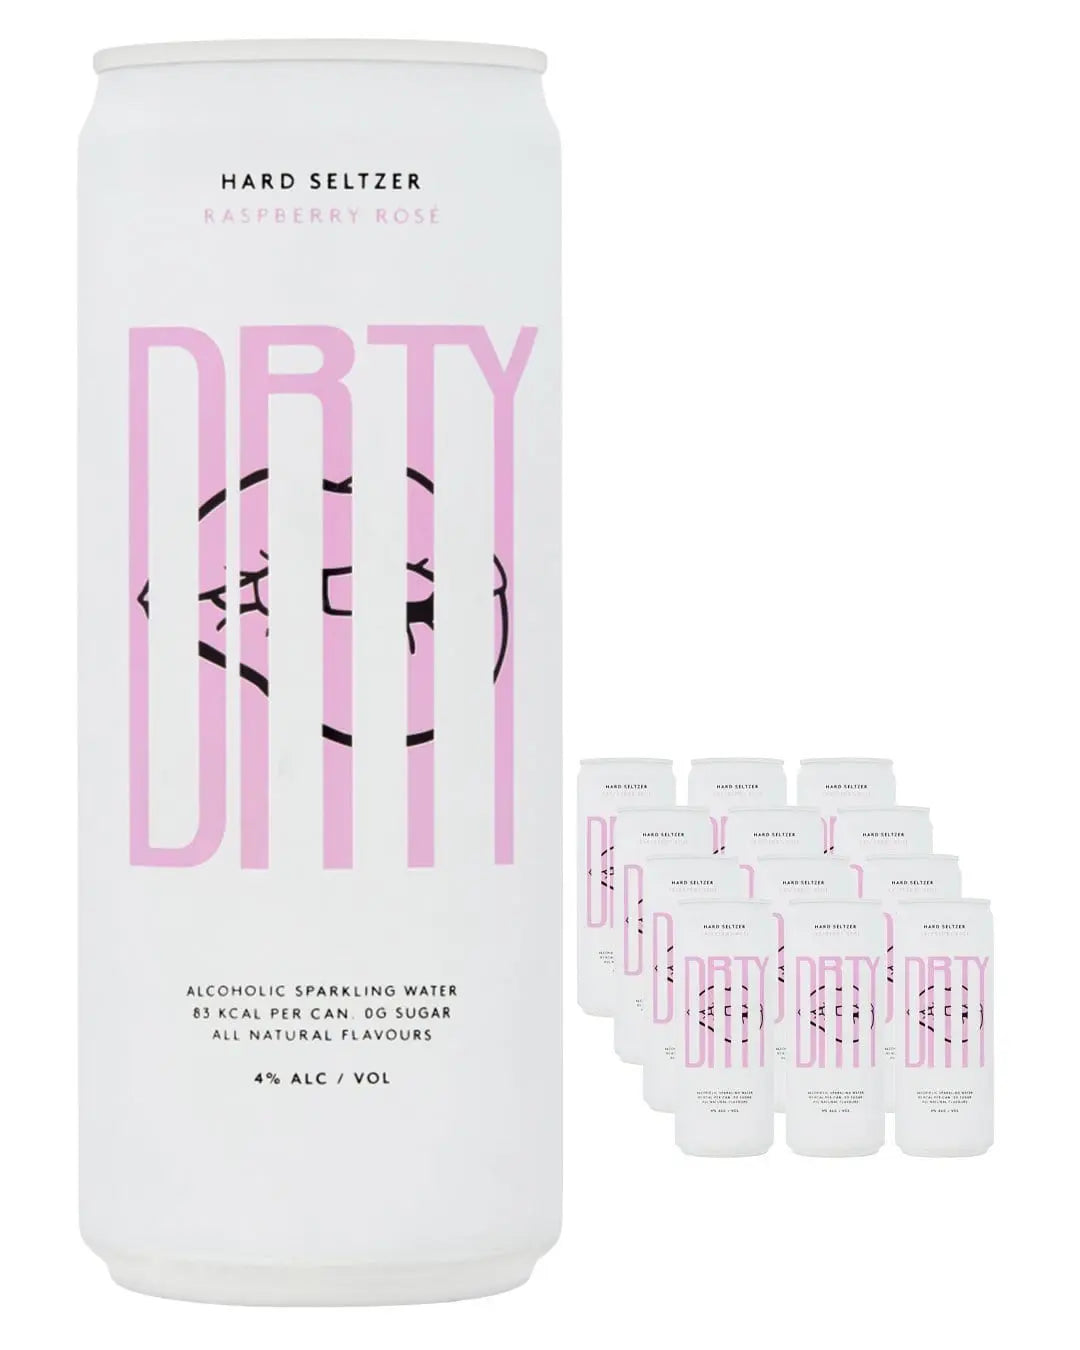 DRTY Raspberry Rose Hard Seltzer Can, 1 x 330 ml Ready Made Cocktails